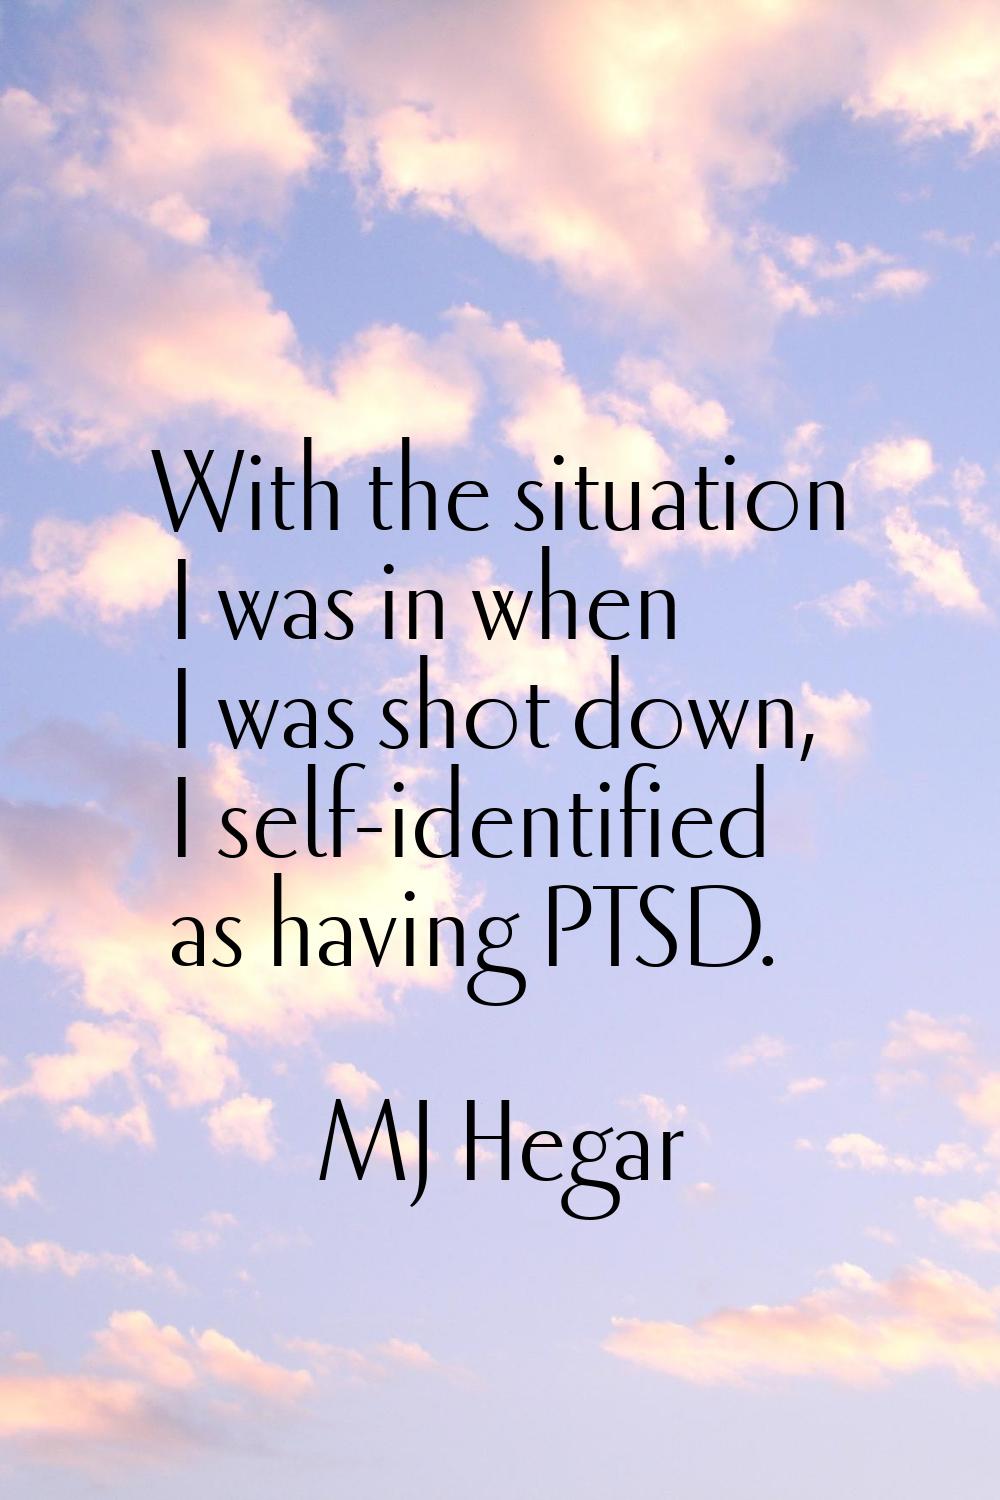 With the situation I was in when I was shot down, I self-identified as having PTSD.